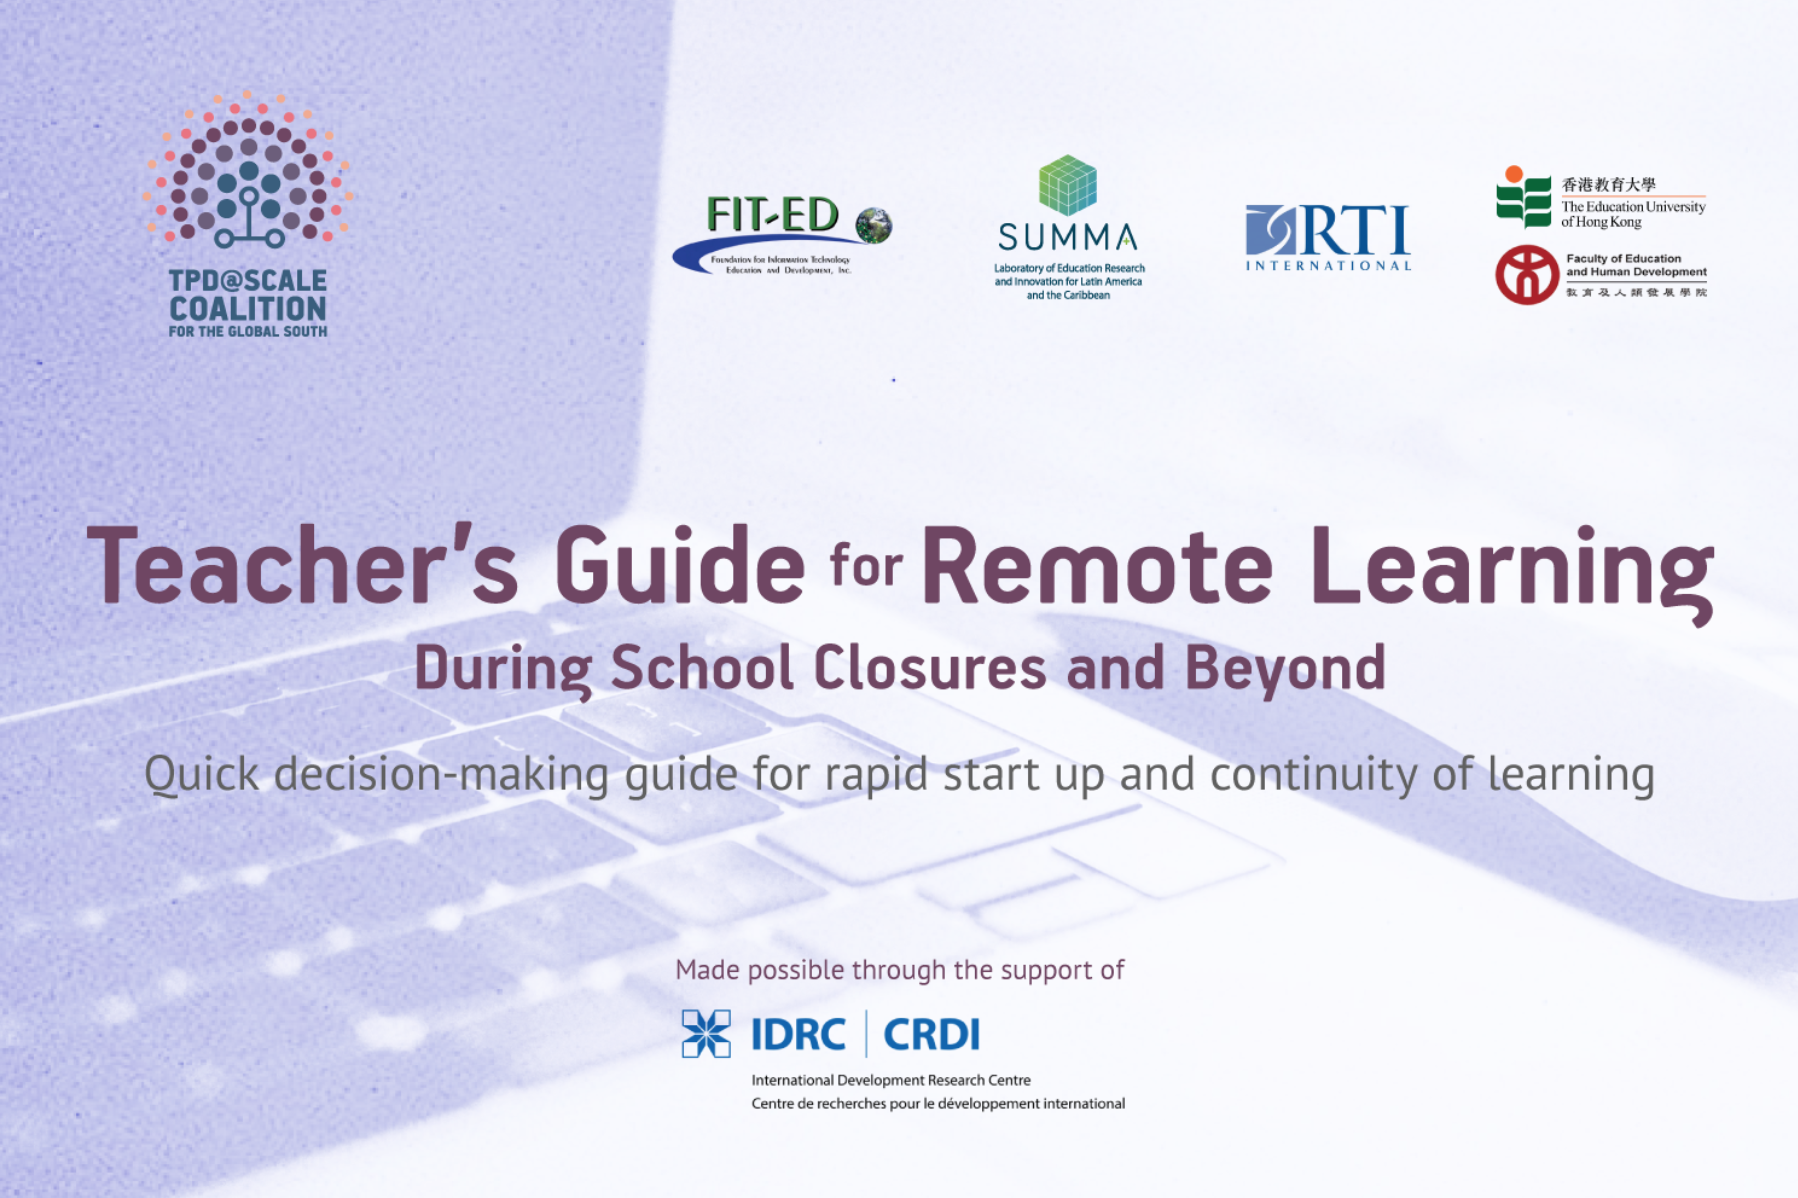 Teacher’s Guide for Remote Learning During School Closures and Beyond